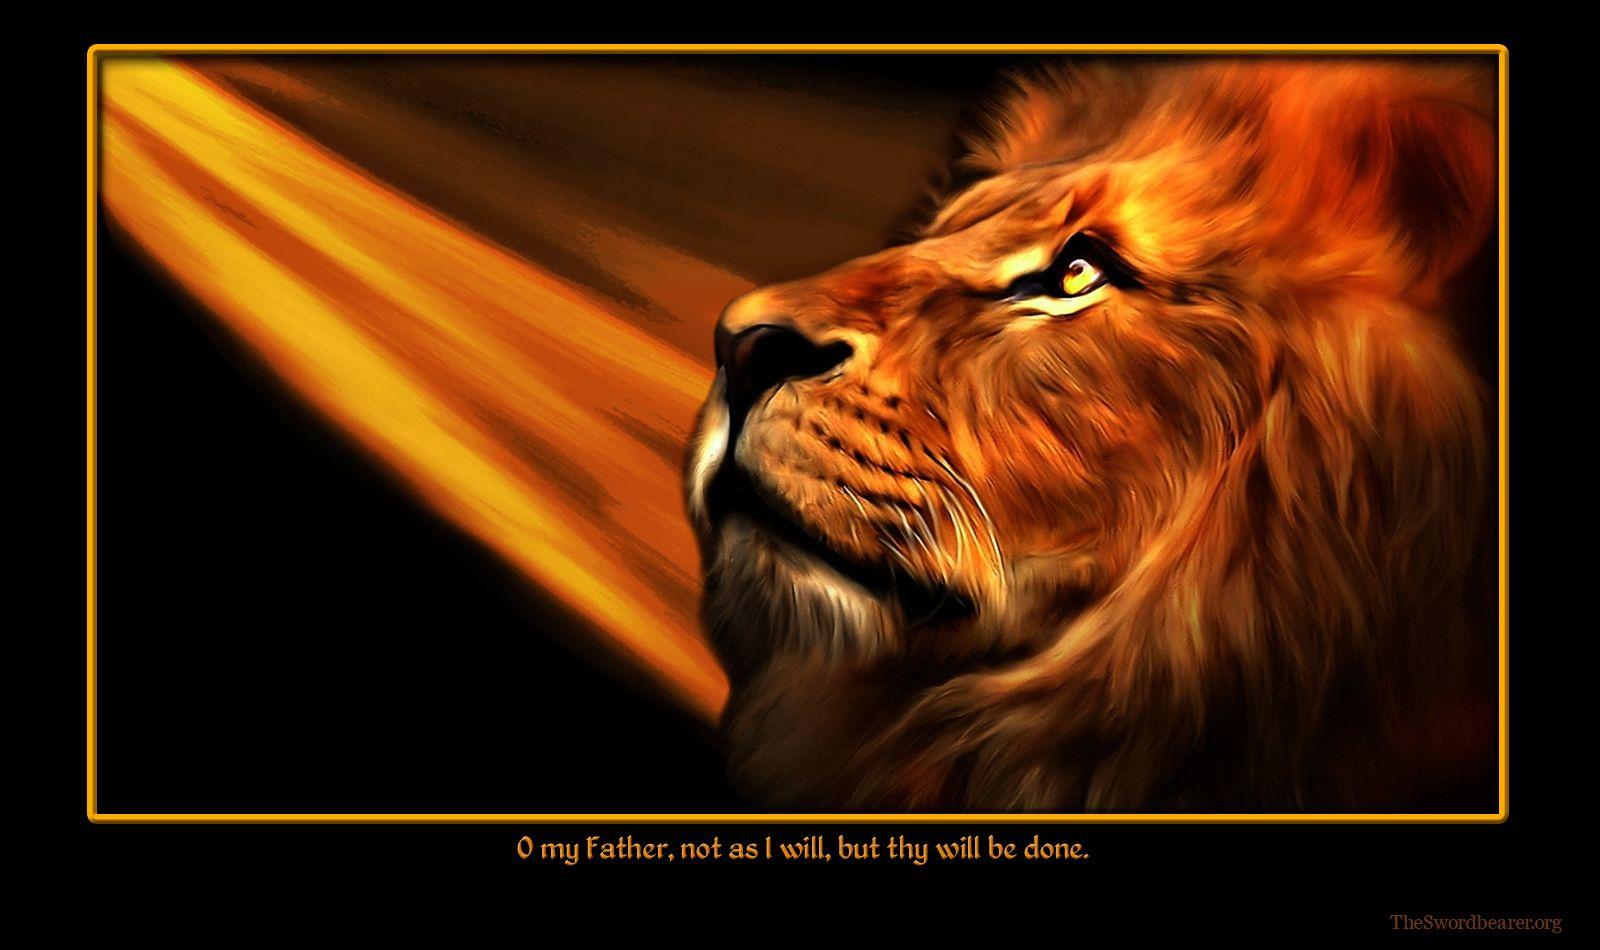 Lion Of Judah Wallpapers 63 images